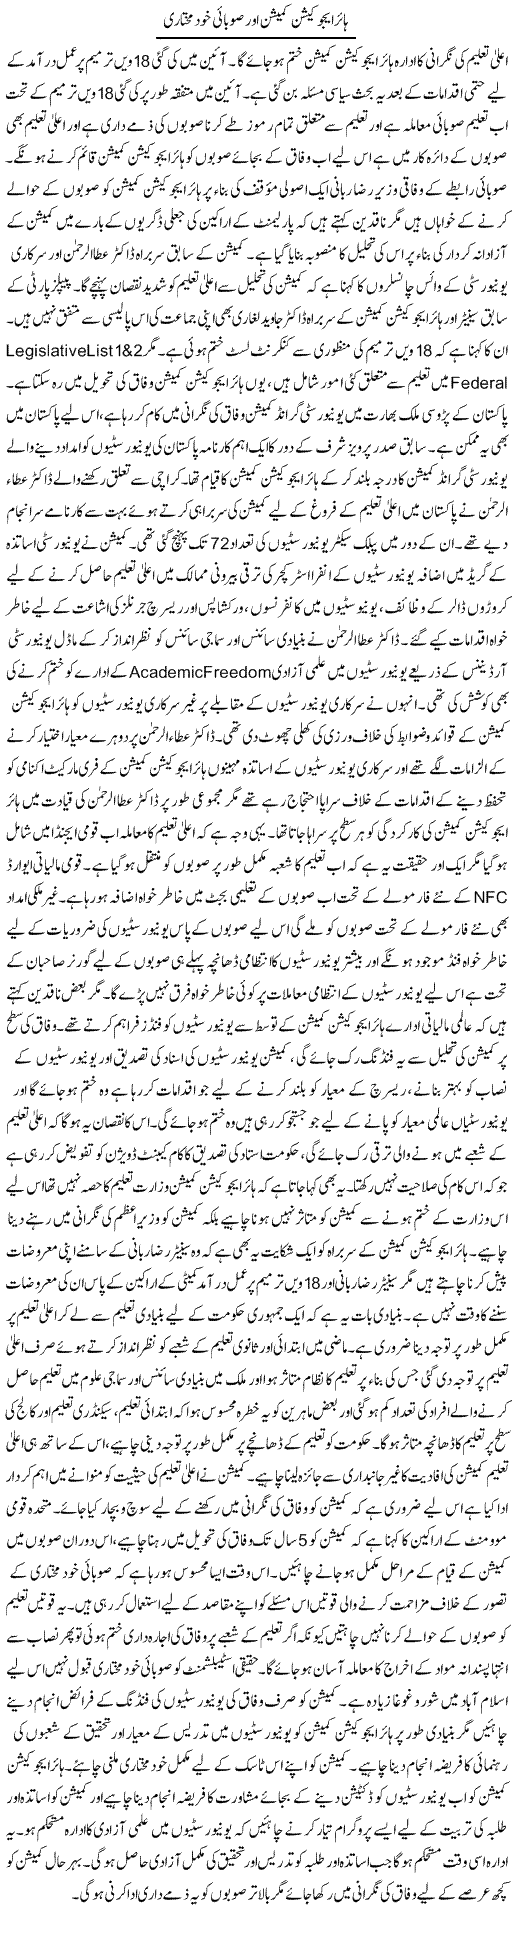 Higher Education Commission Express Column Tauseef Ahmed 9 April 2011